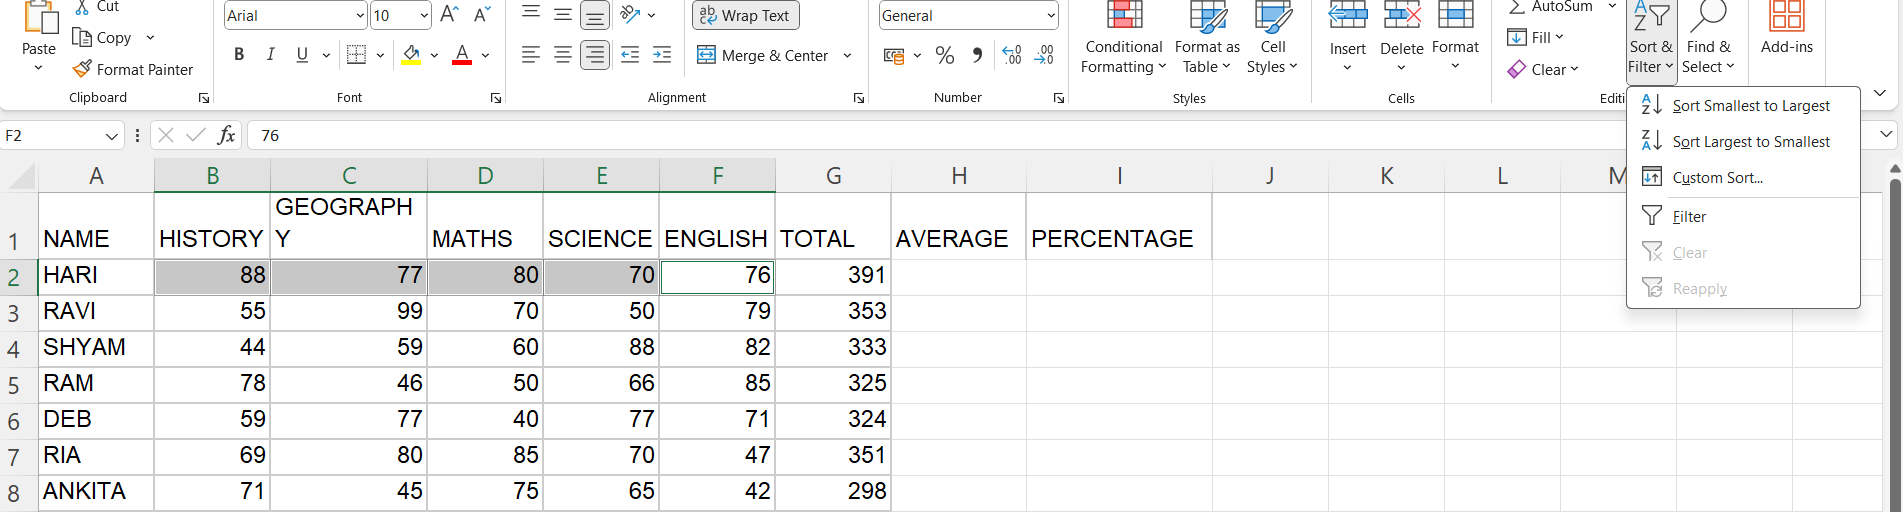 Sample Excel Sheet showing the best ways to sort numerical data